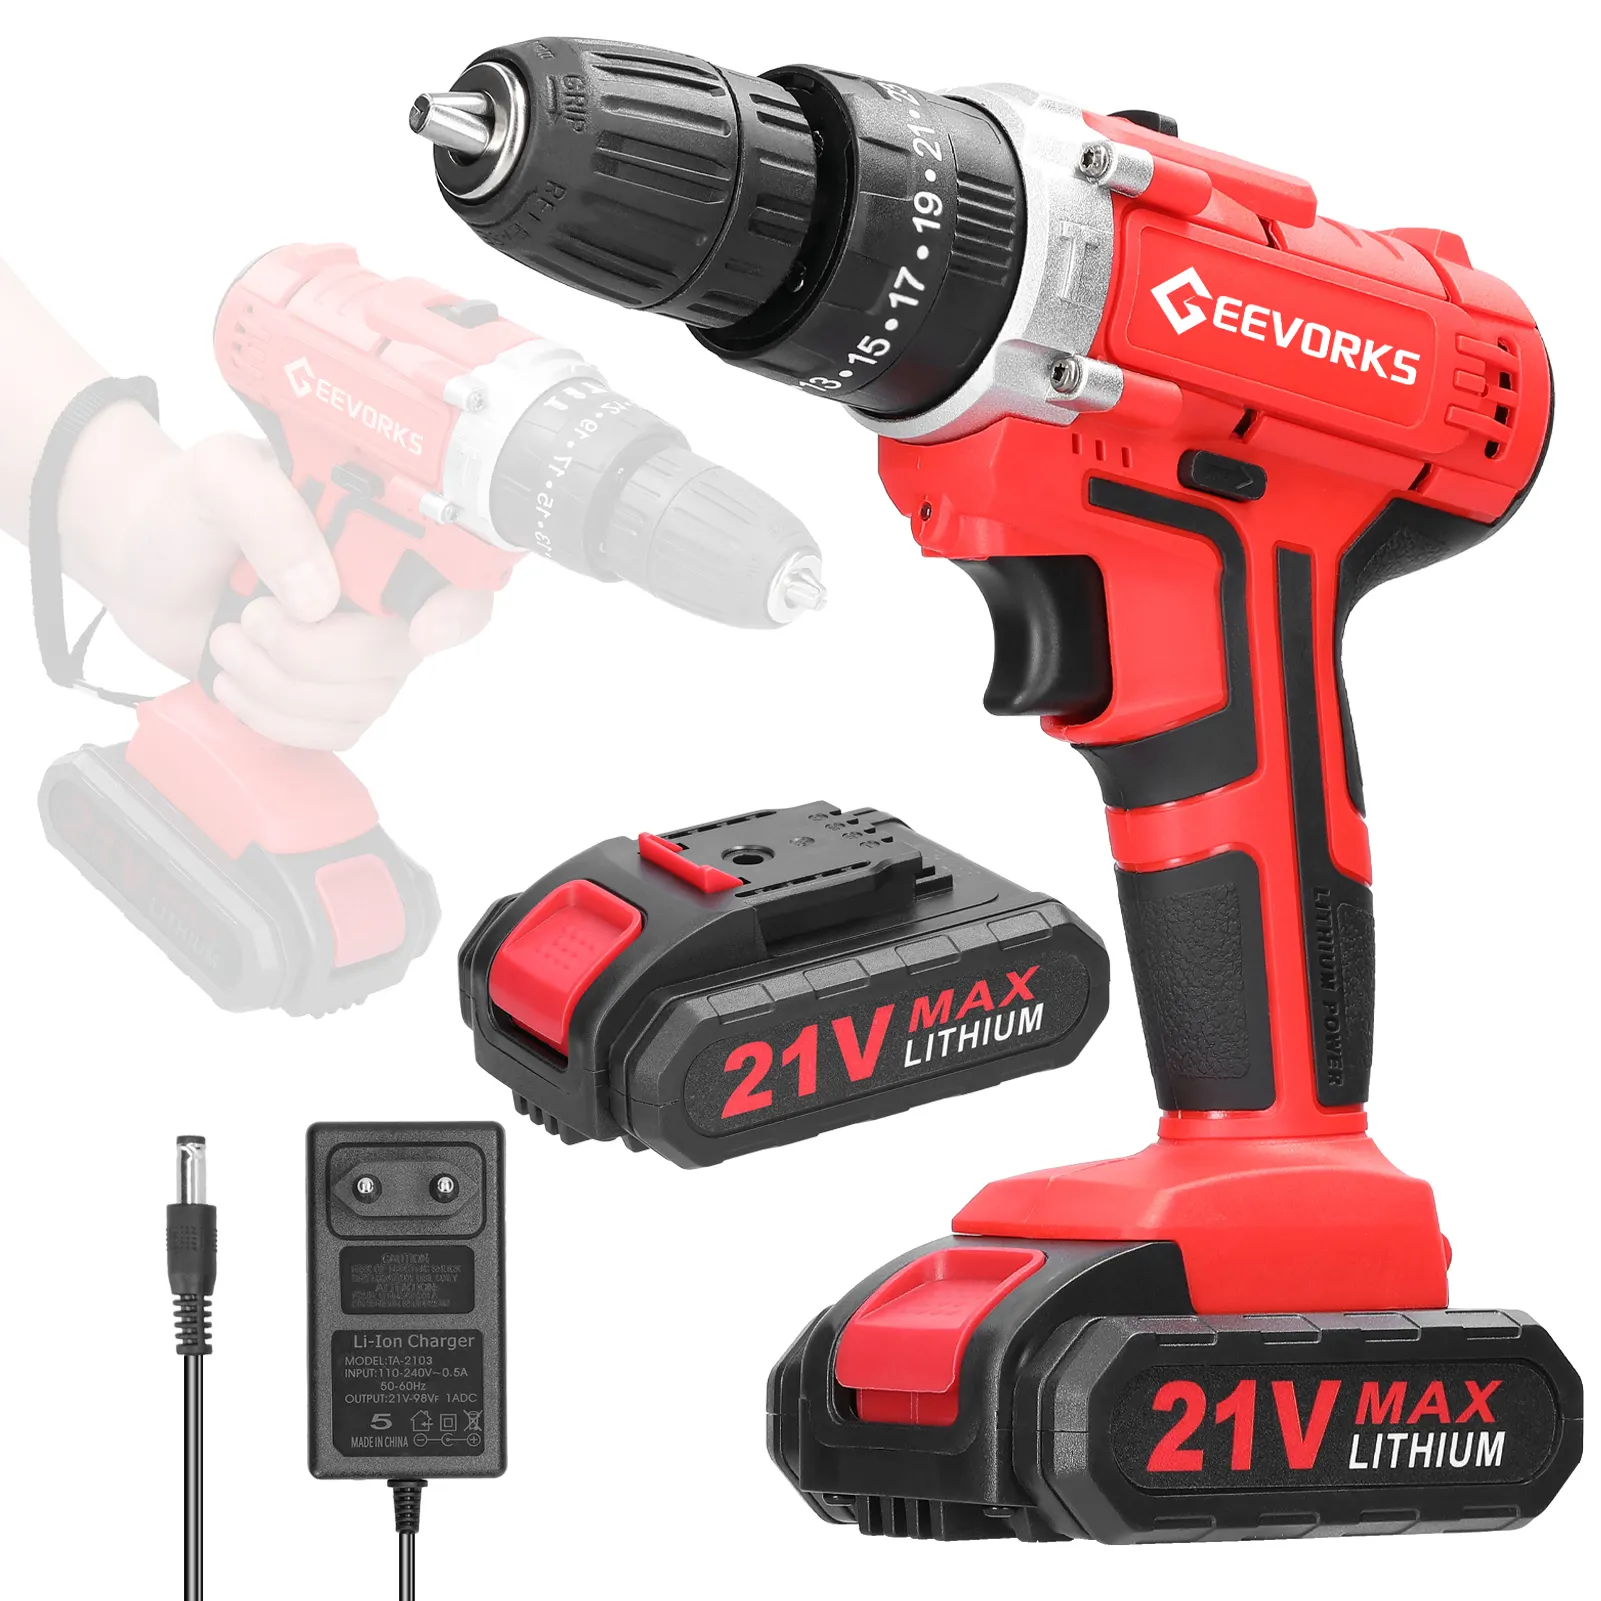 21V 3 IN 1 Multifunctional Electric Impact Cordless Drill 1200mAh Rechargeable Lithium Battery 28N.m Hand Drills Power Tool